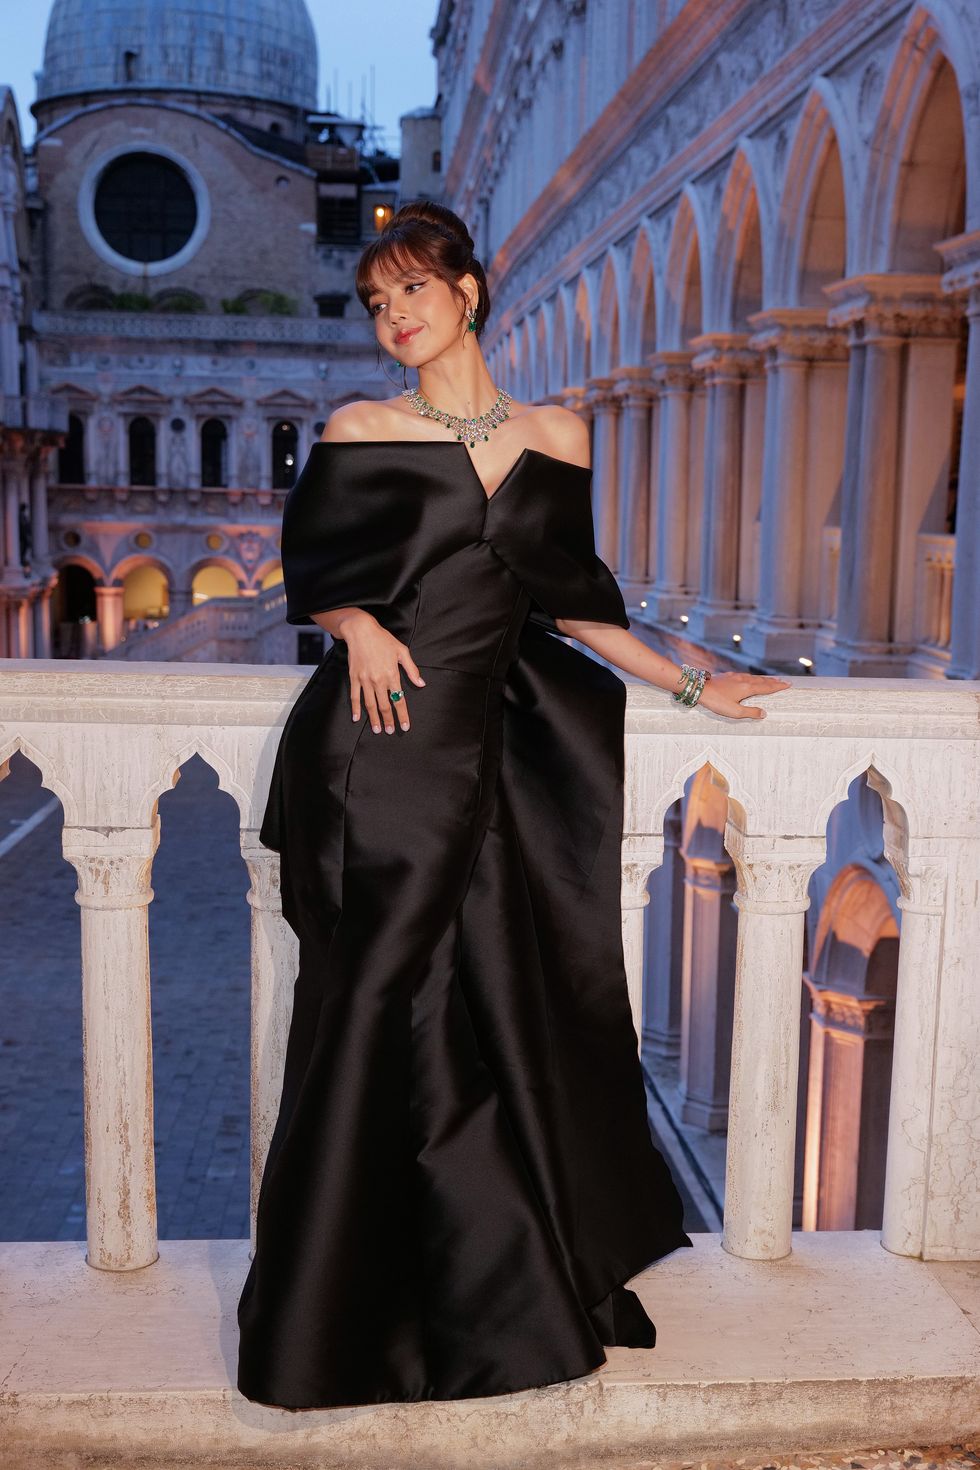 venice, italy may 16 lisa manobal attends the bulgari mediterranea high jewelry event at palazzo ducale on may 16, 2023 in venice photo by claudio laveniagetty images for bulgari